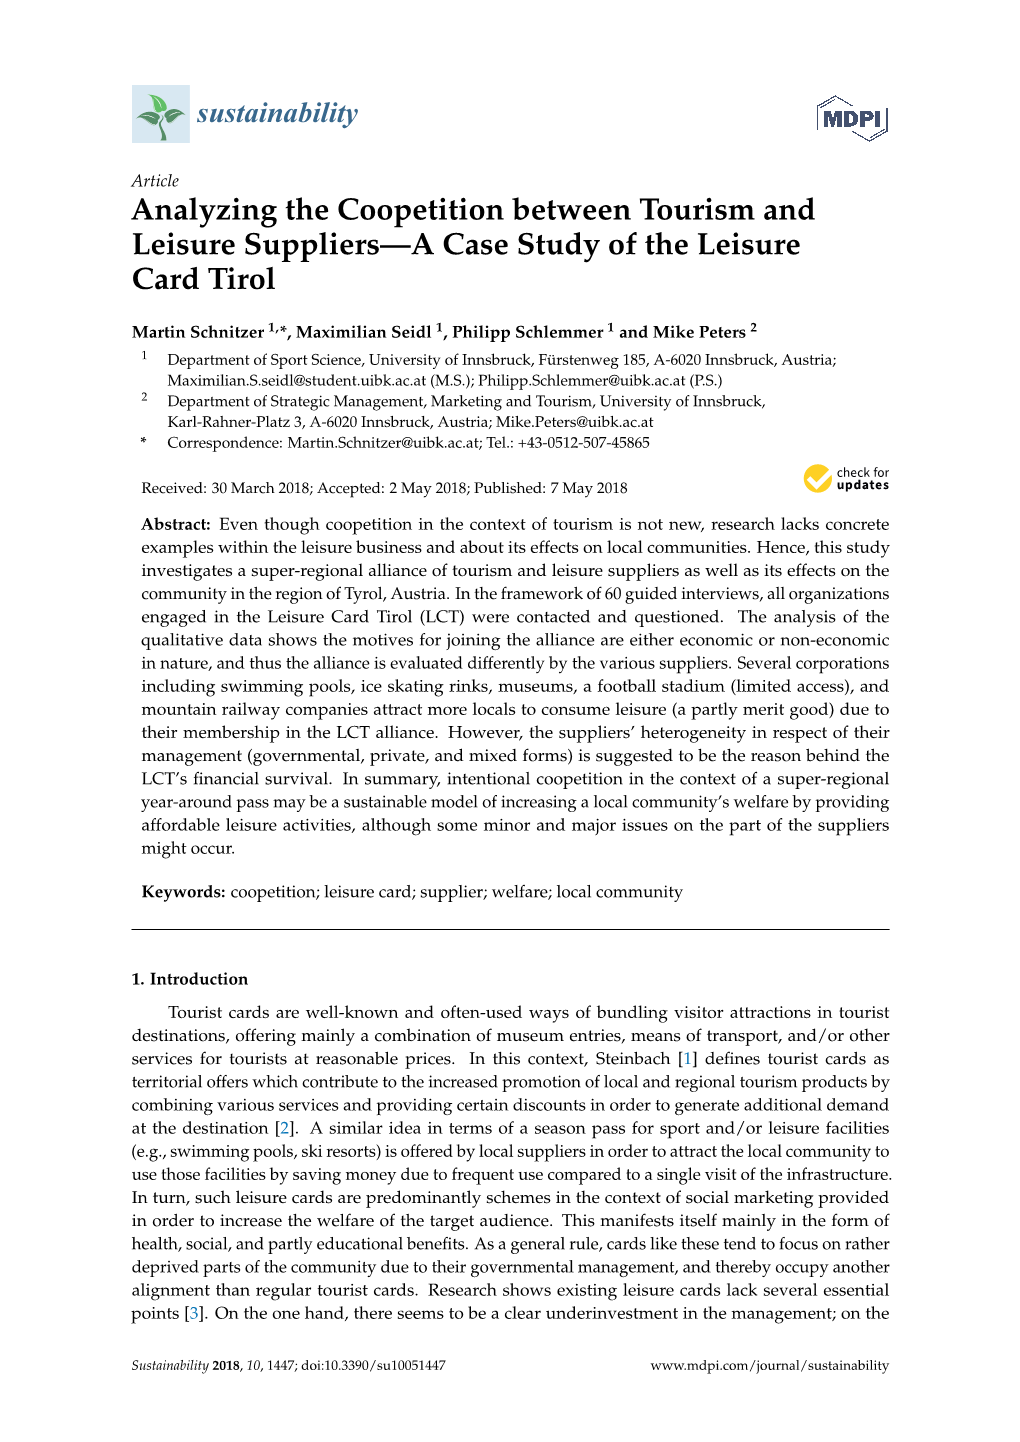 Analyzing the Coopetition Between Tourism and Leisure Suppliers—A Case Study of the Leisure Card Tirol